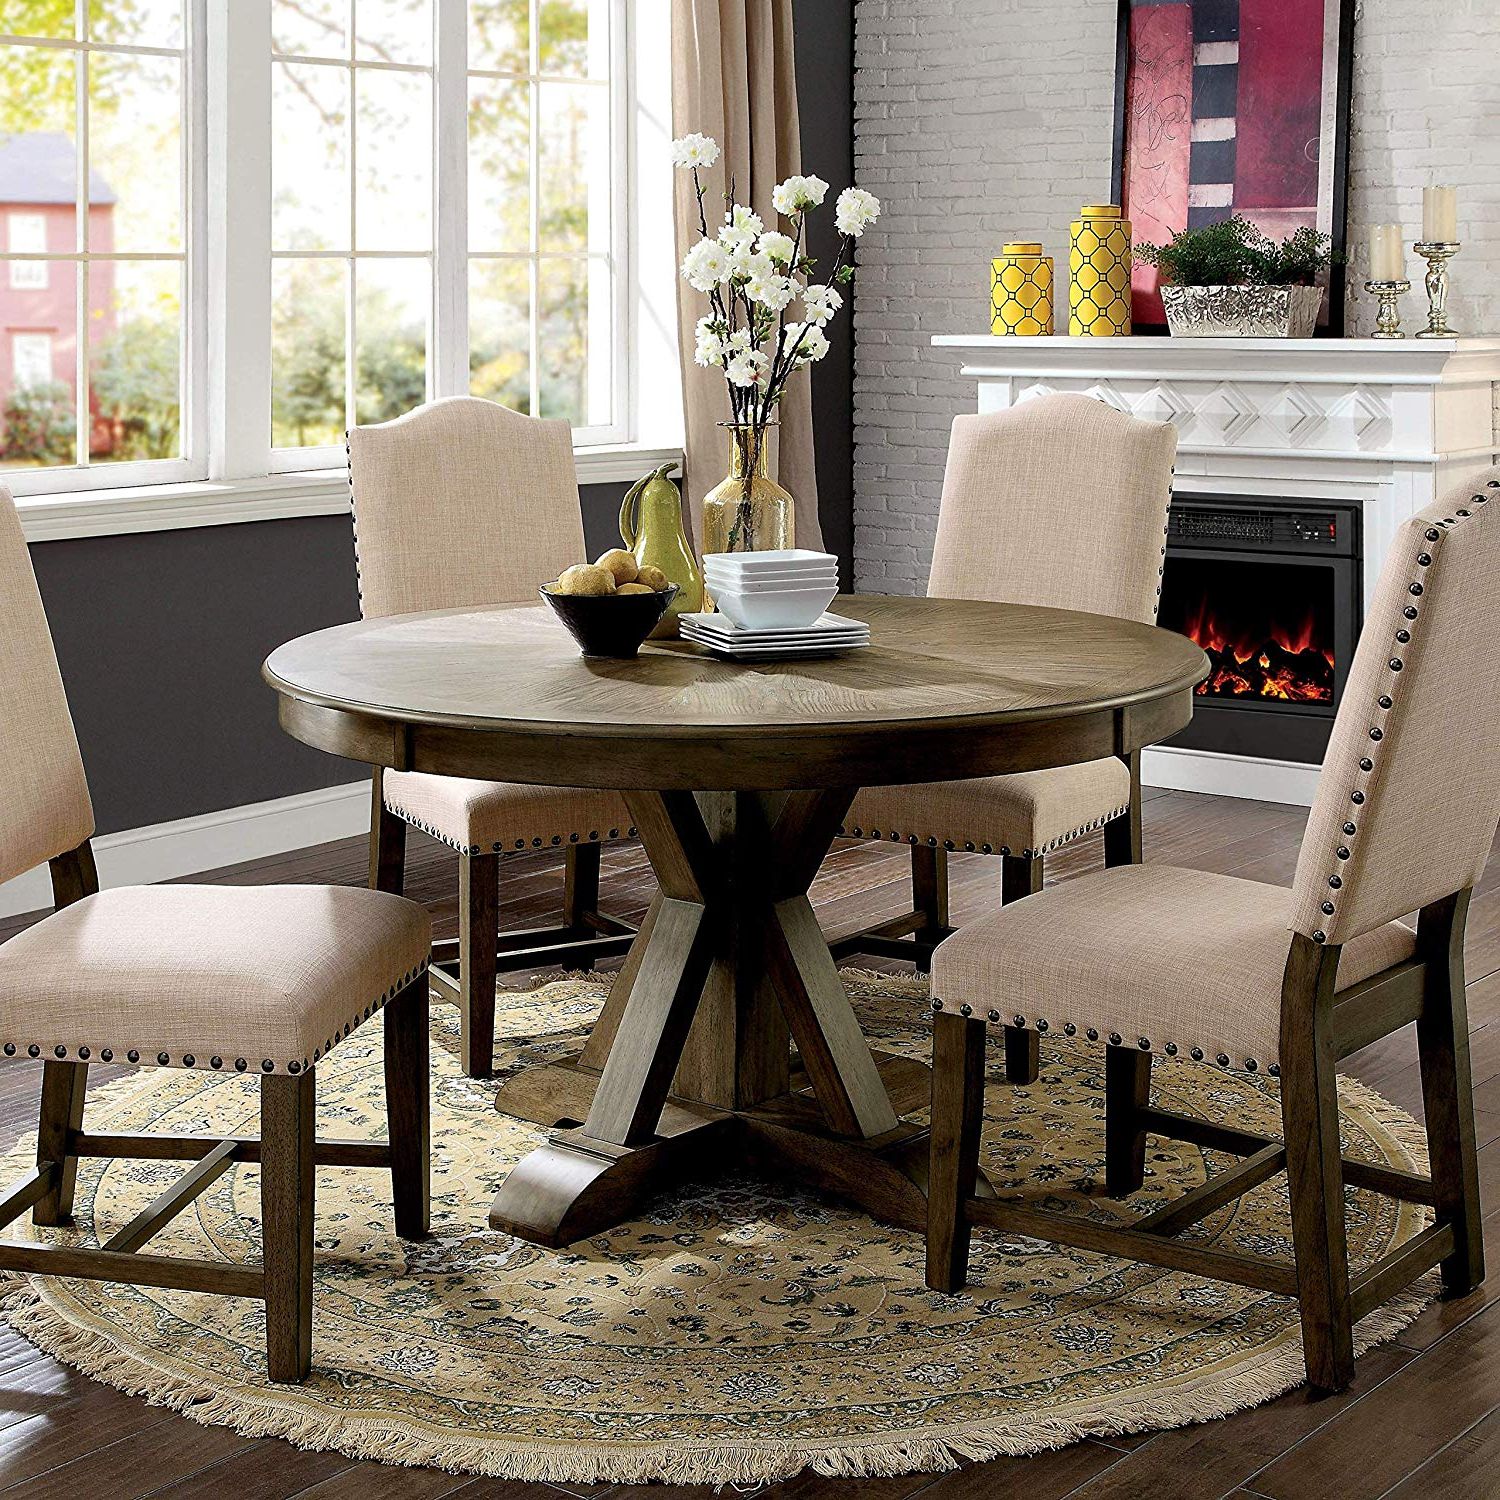 Favorite Transitional 4 Seating Double Drop Leaf Casual Dining Tables Regarding Amazon: Rustic Light Oak Round 54 Inch Pedestal Dining (View 8 of 30)